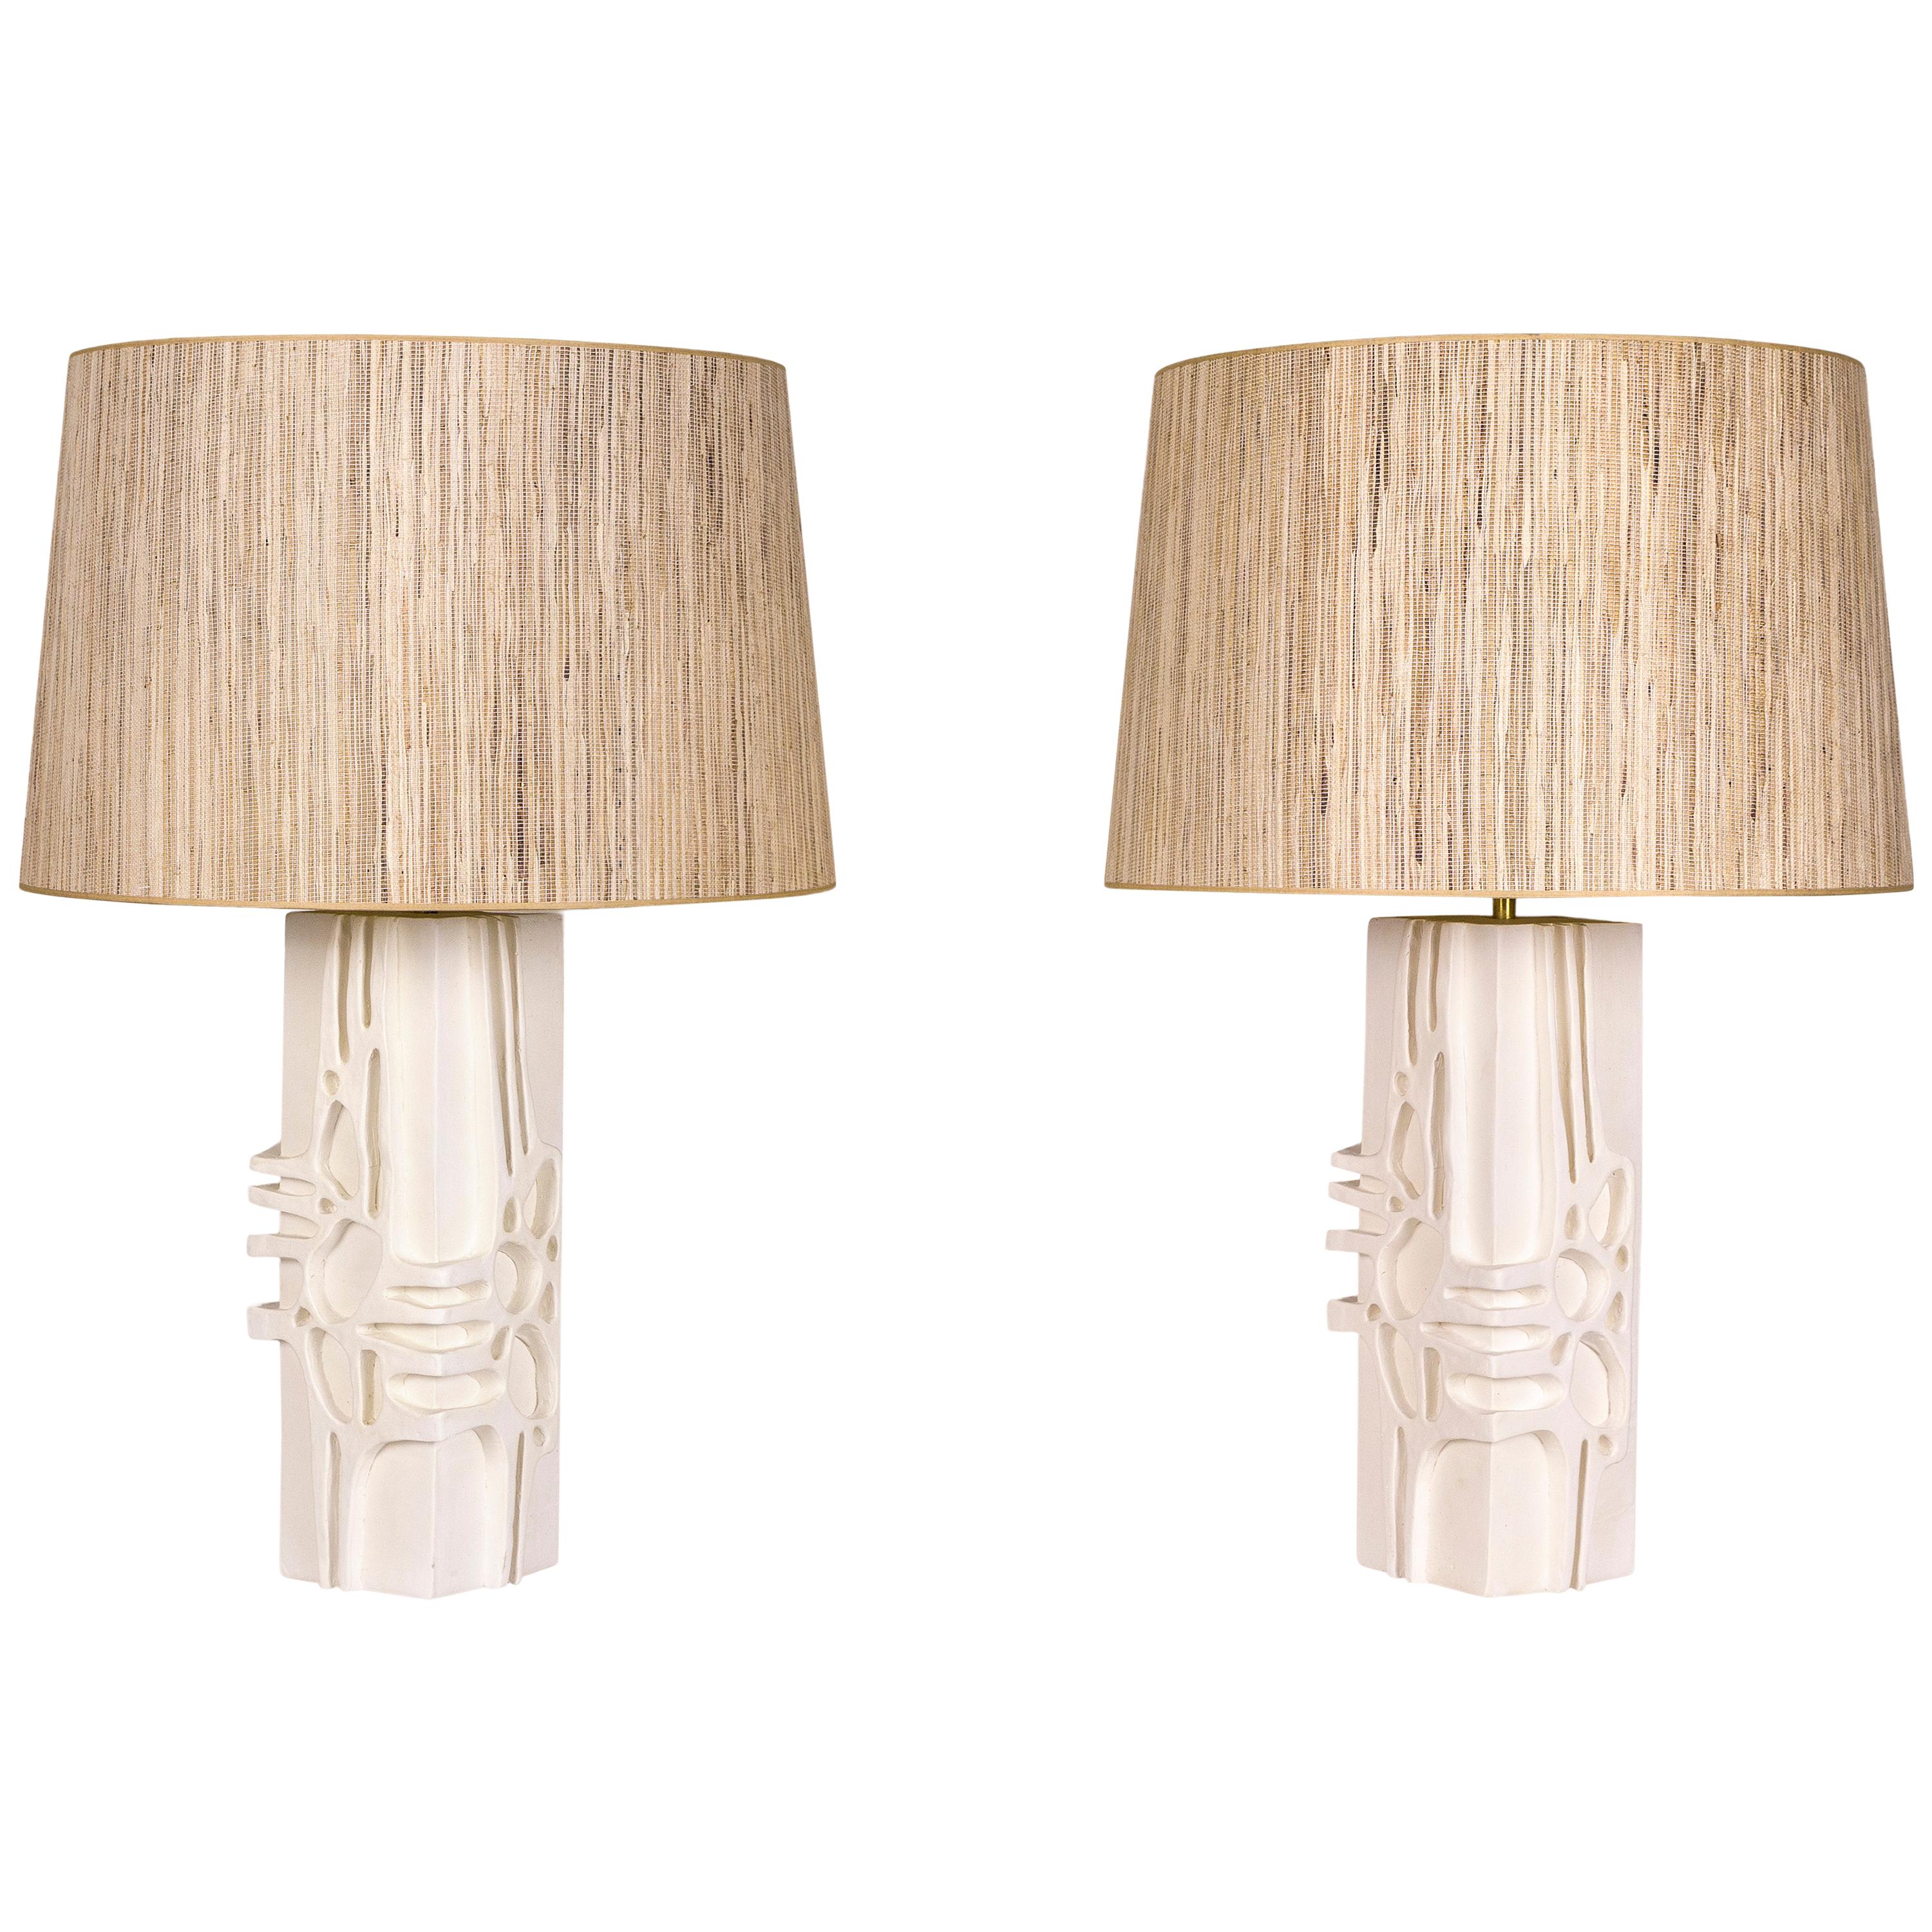 Pair of Plaster Lamps, circa 2000, France